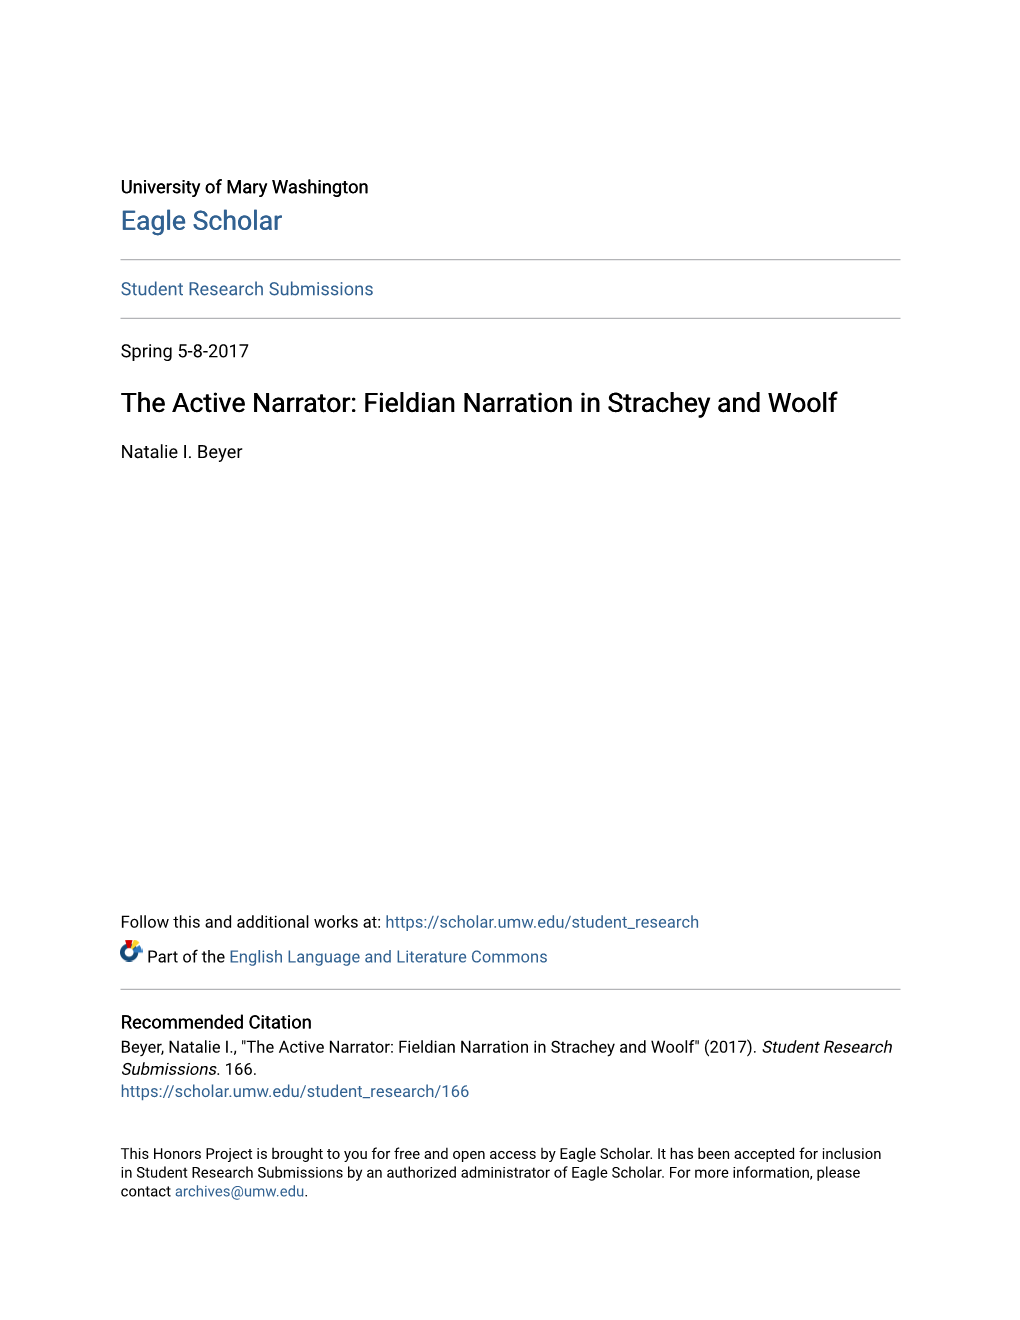 The Active Narrator: Fieldian Narration in Strachey and Woolf